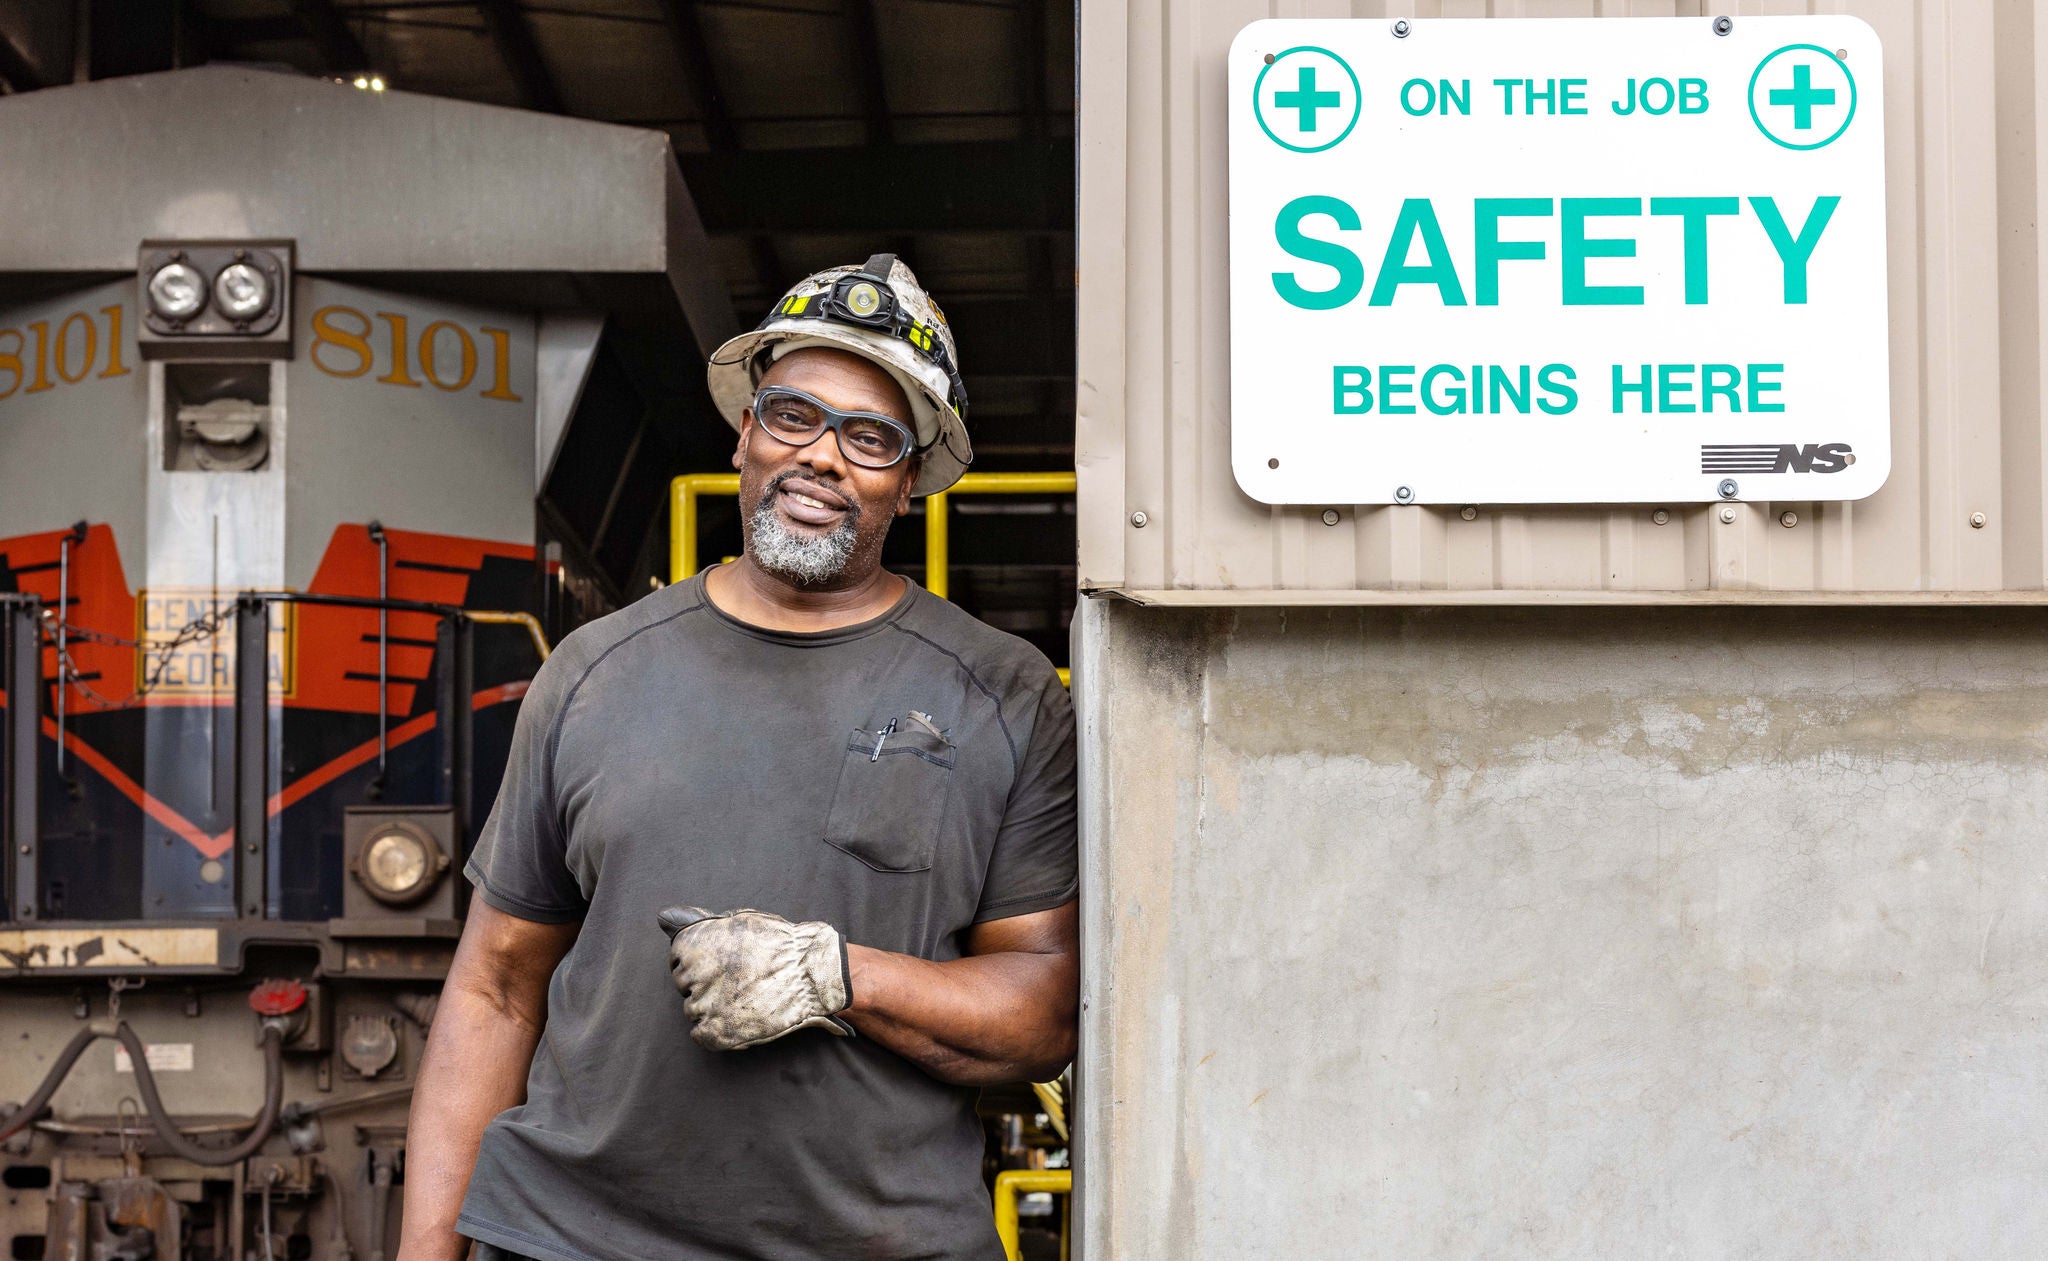 Norfolk Southern employee in repair shop promoting rail safety 